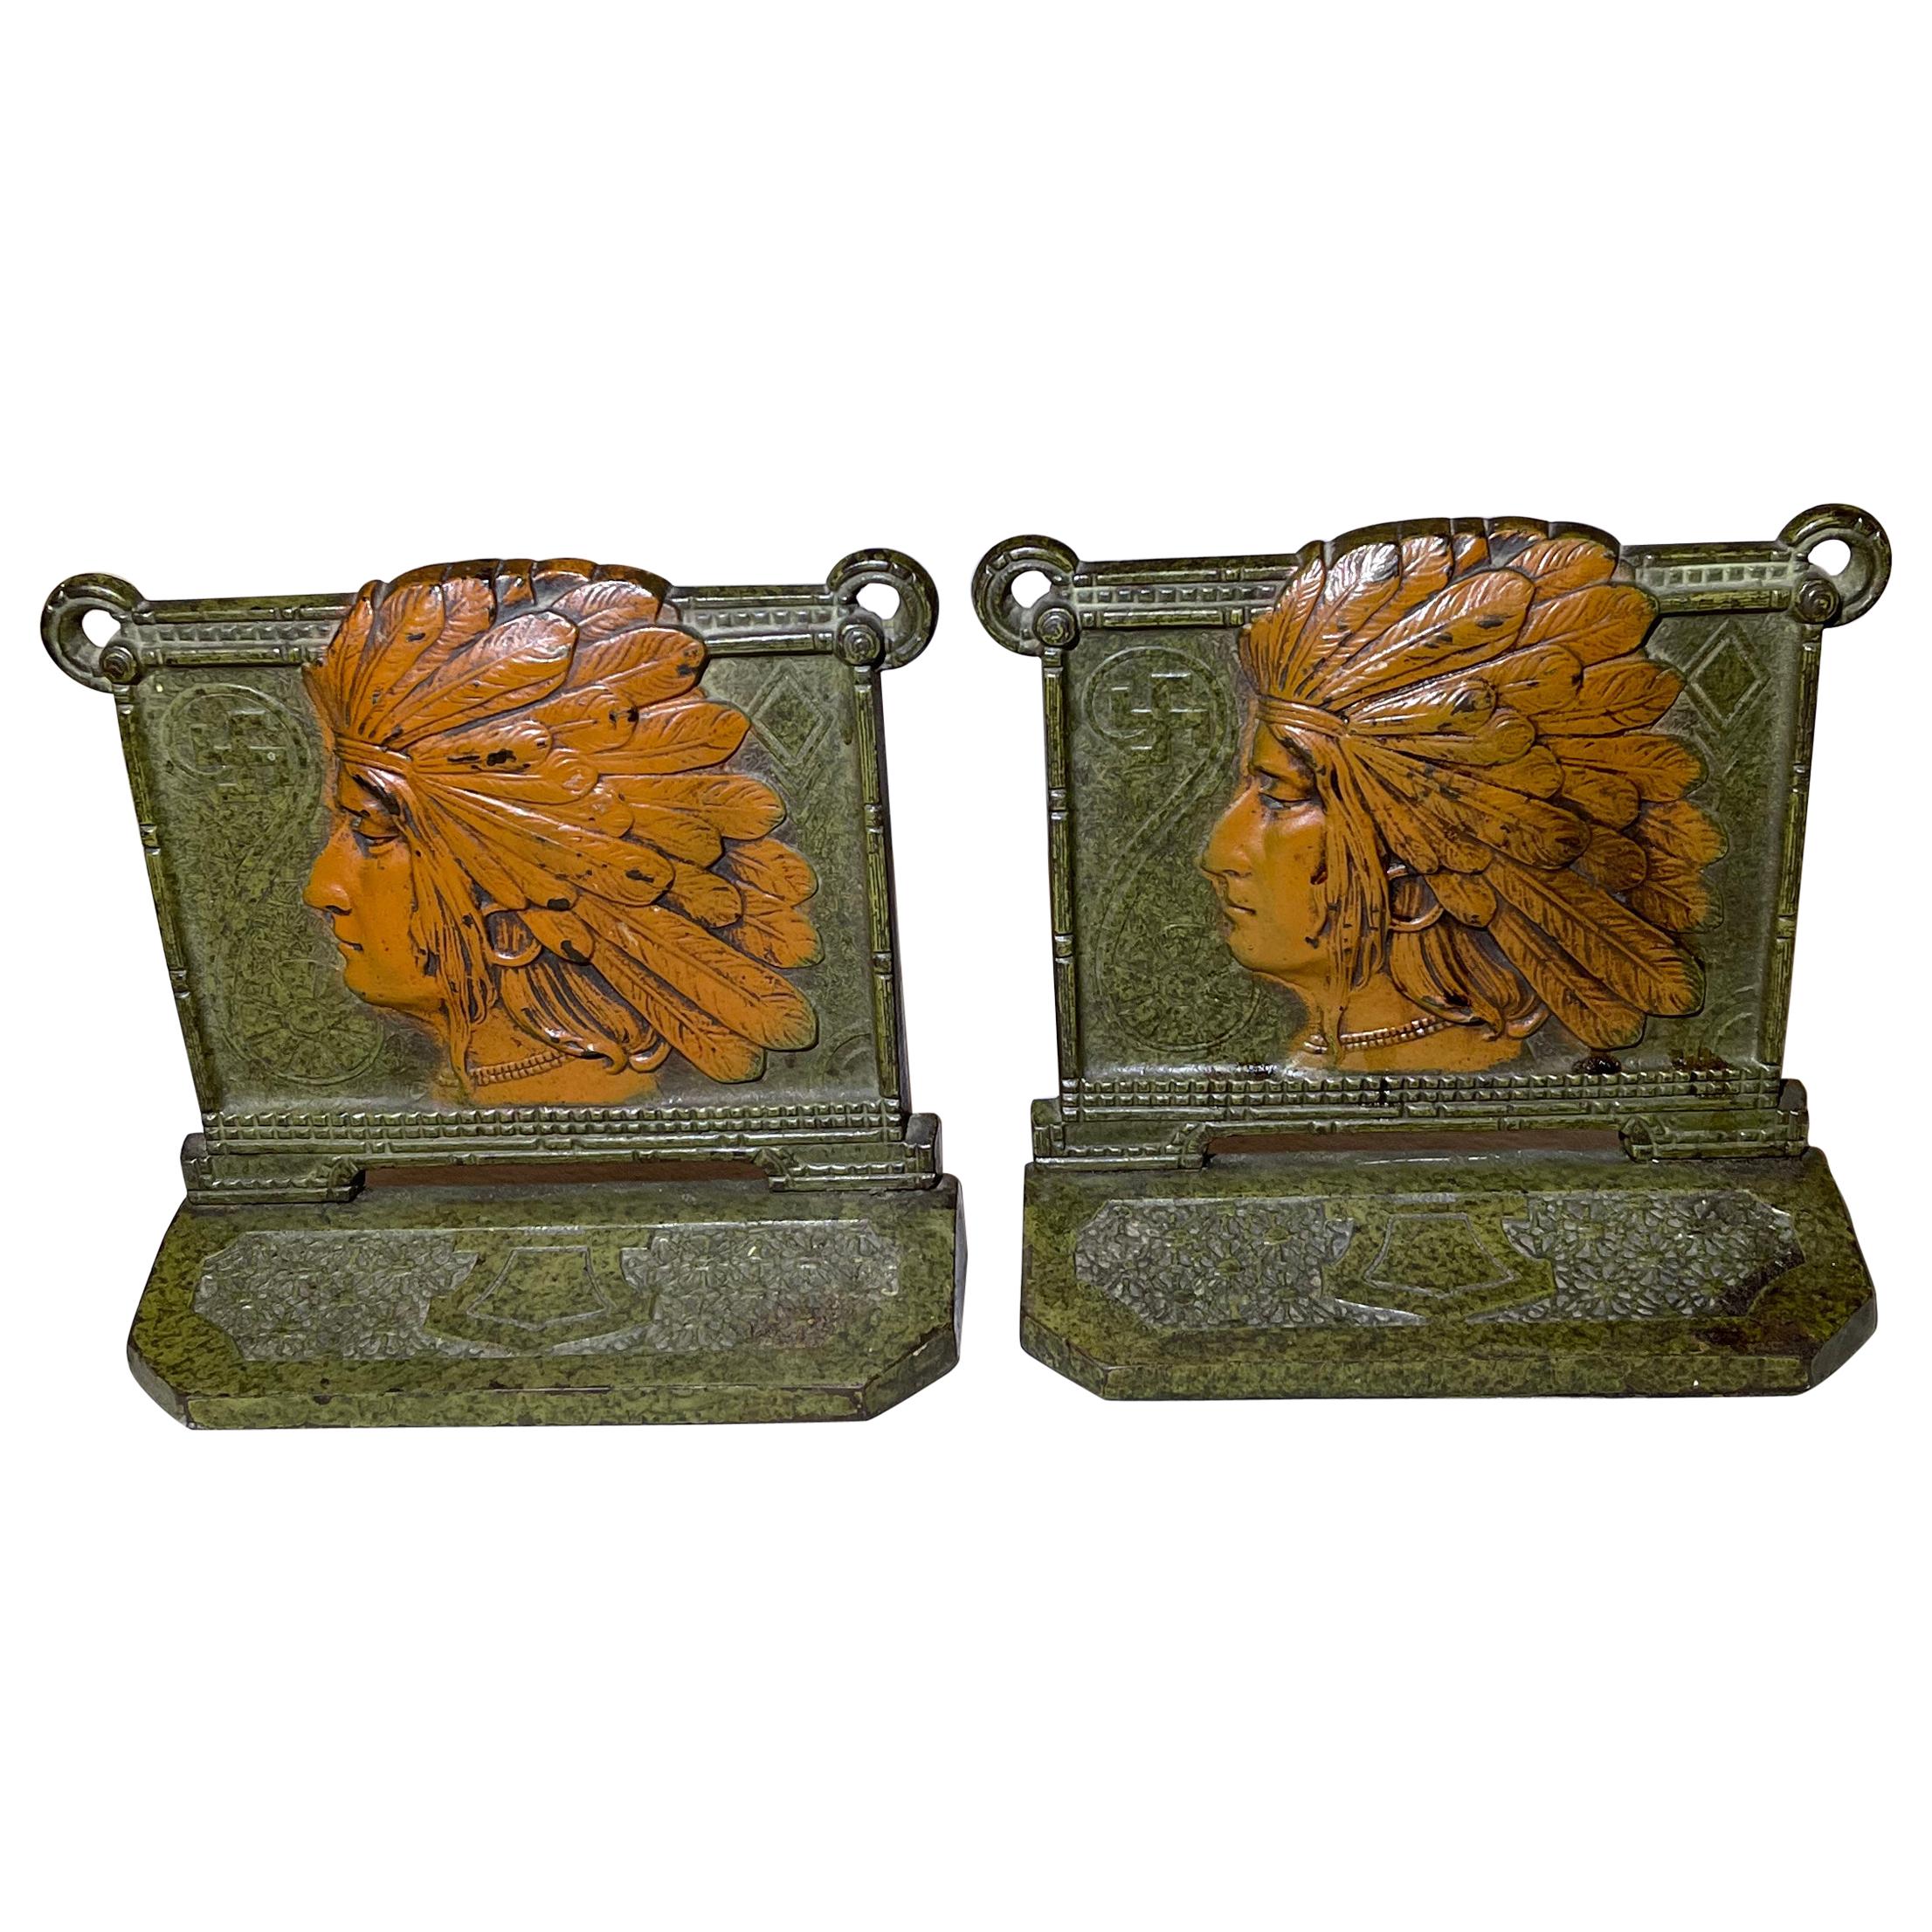 Pair of Cast Iron Bookends, American Indian Theme, by Judd Co, ca. 1910